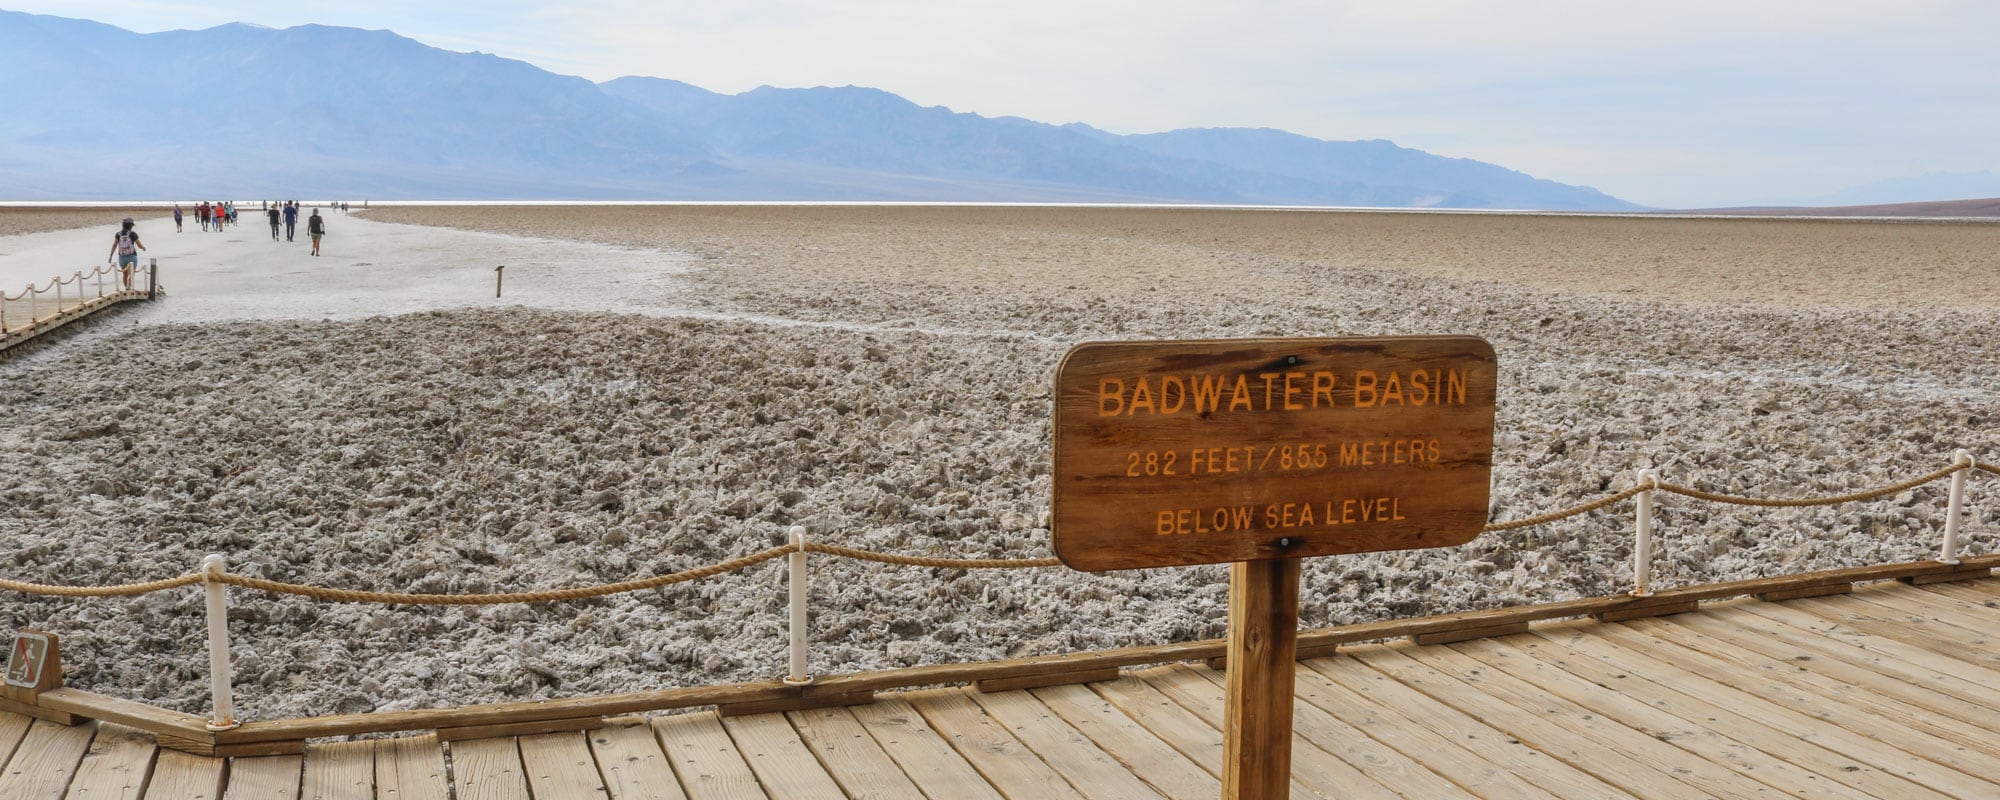 Death Valley National Park - Banner Badwater Basin